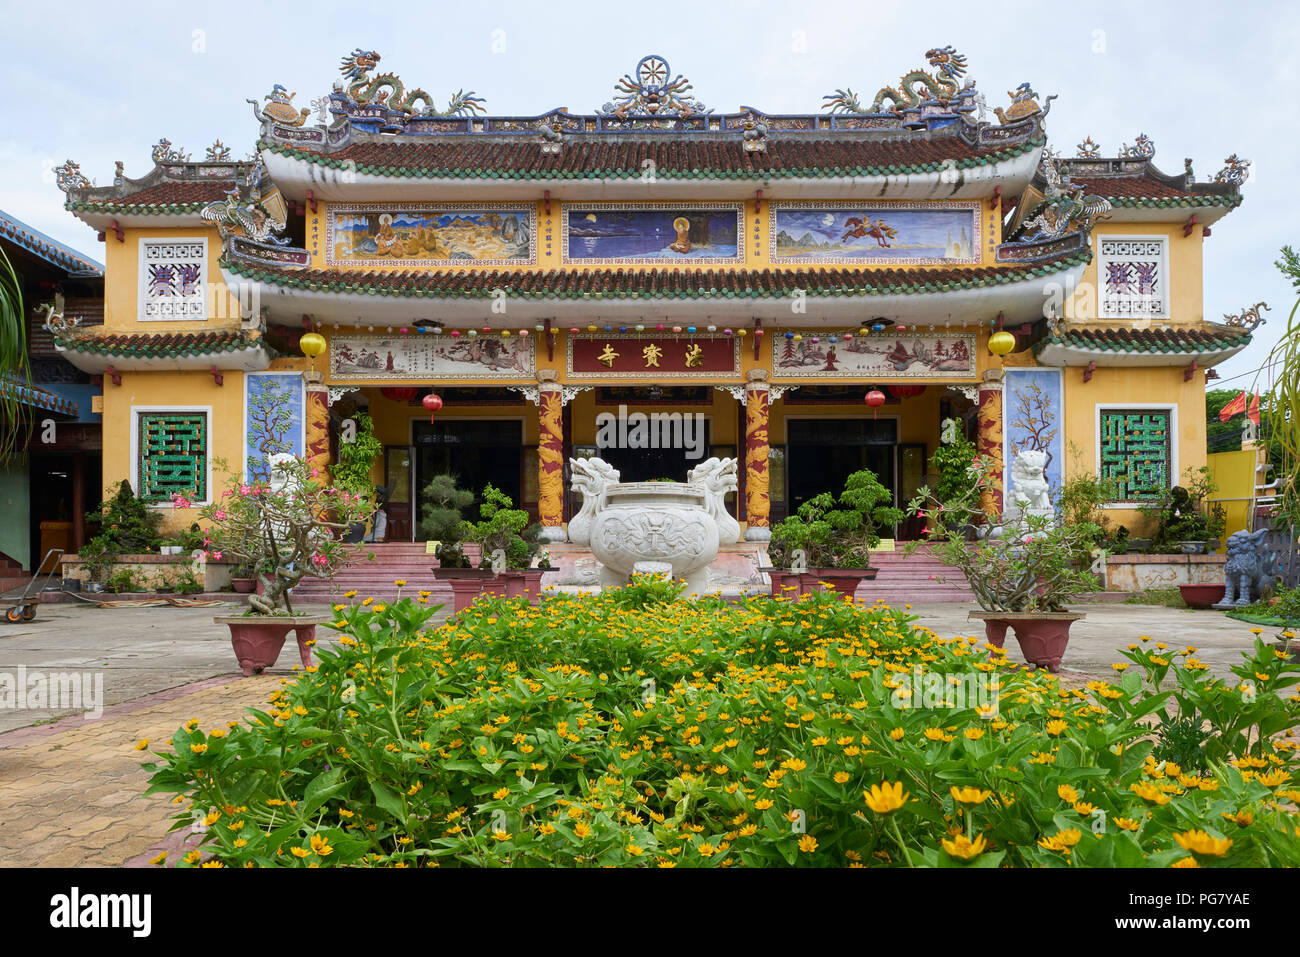 Entrance to Phap Bao Buddhist temple in the town of Hoi An, Central Vietnam. Stock Photo